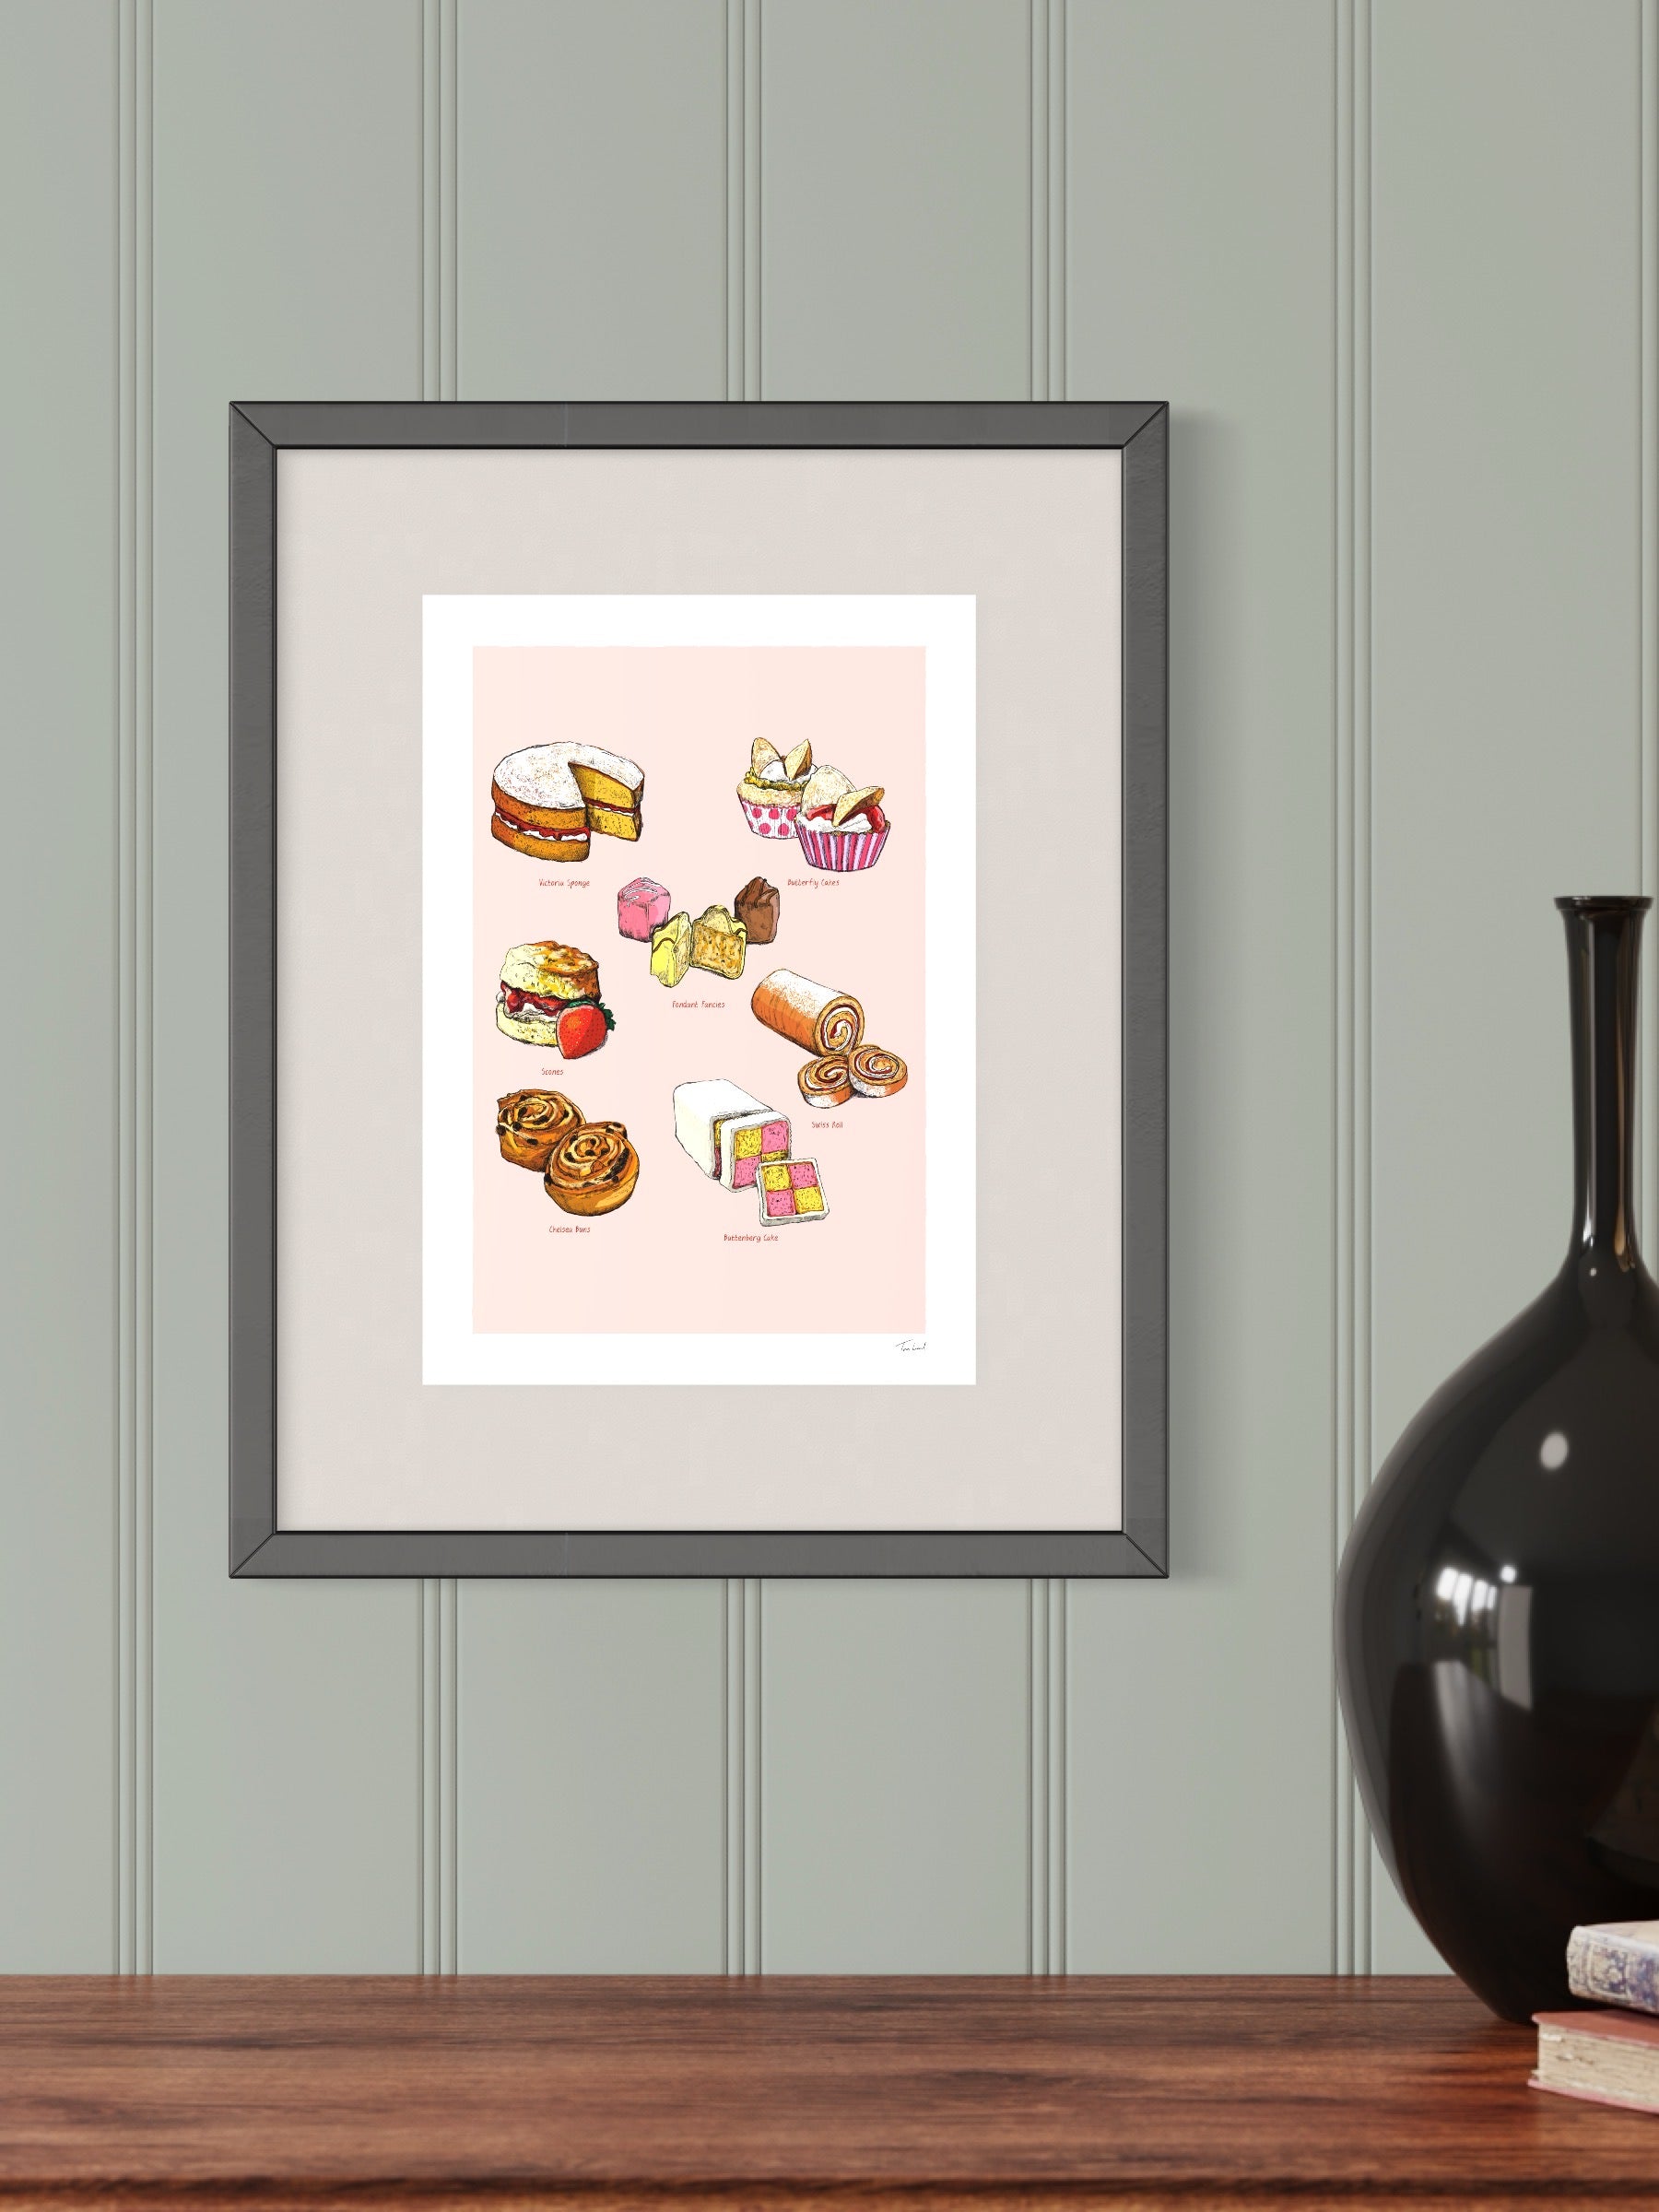 This image shows a giclee wall art print by Tom Laird Illustration of some of the most popular bakes, framed in a beautiful living room with tasteful modern home decor. This art print is available from Tom Laird Illustration in various sizes.